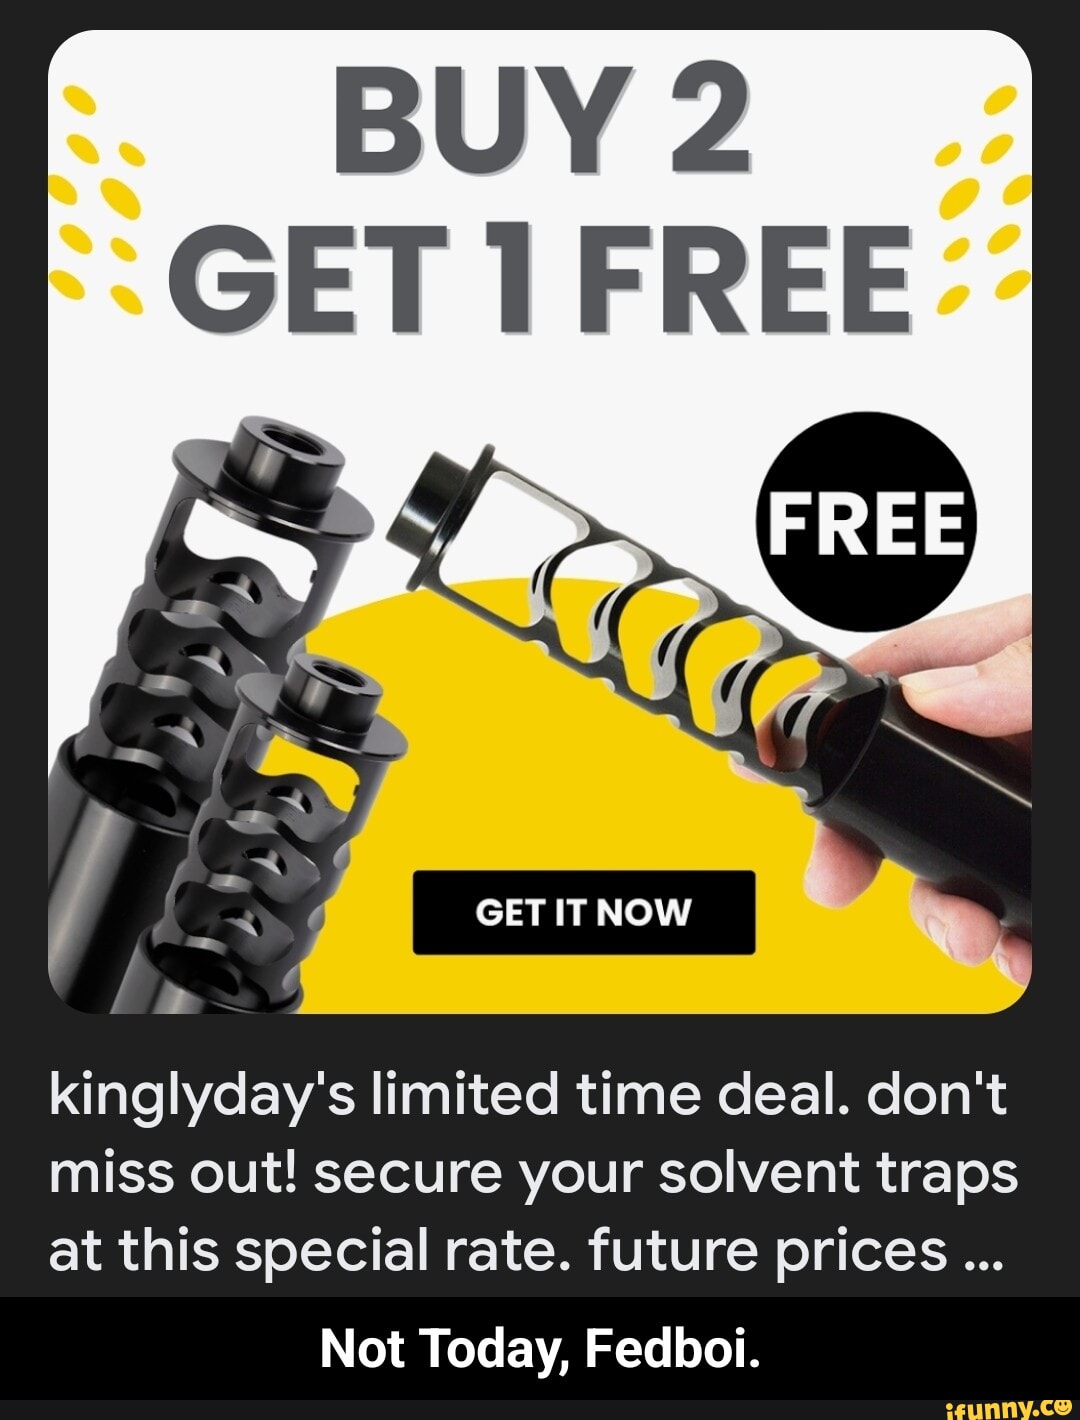 BUY 2 GET I FREE GET IT NOW kinglyday's limited time deal. don't miss out!